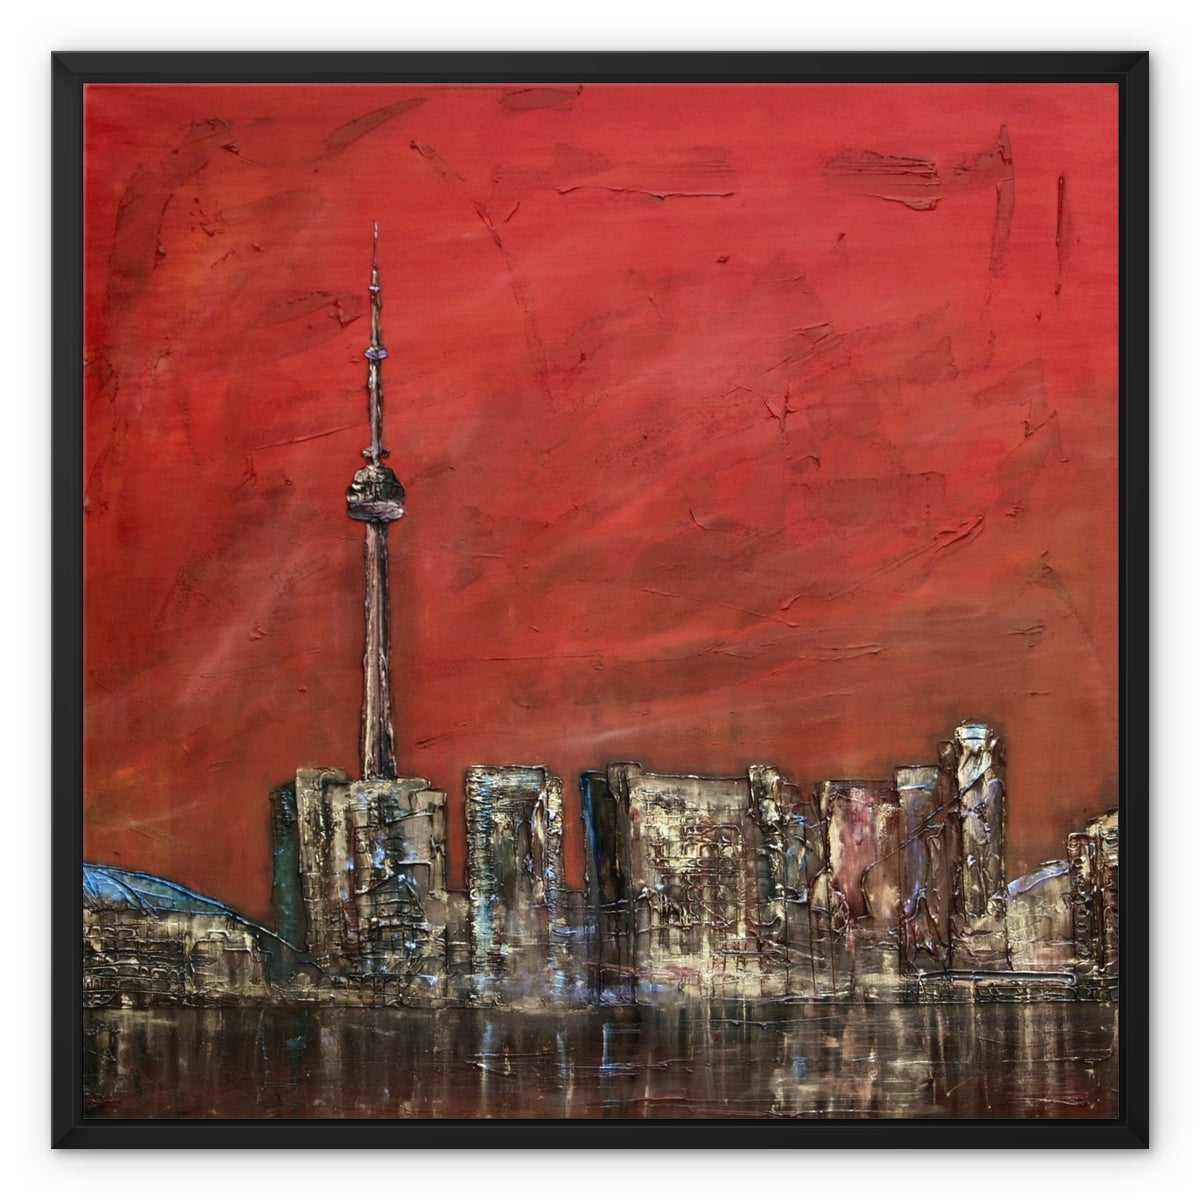 Toronto Sunset Painting | Framed Canvas From Scotland-Floating Framed Canvas Prints-World Art Gallery-24"x24"-Black Frame-Paintings, Prints, Homeware, Art Gifts From Scotland By Scottish Artist Kevin Hunter